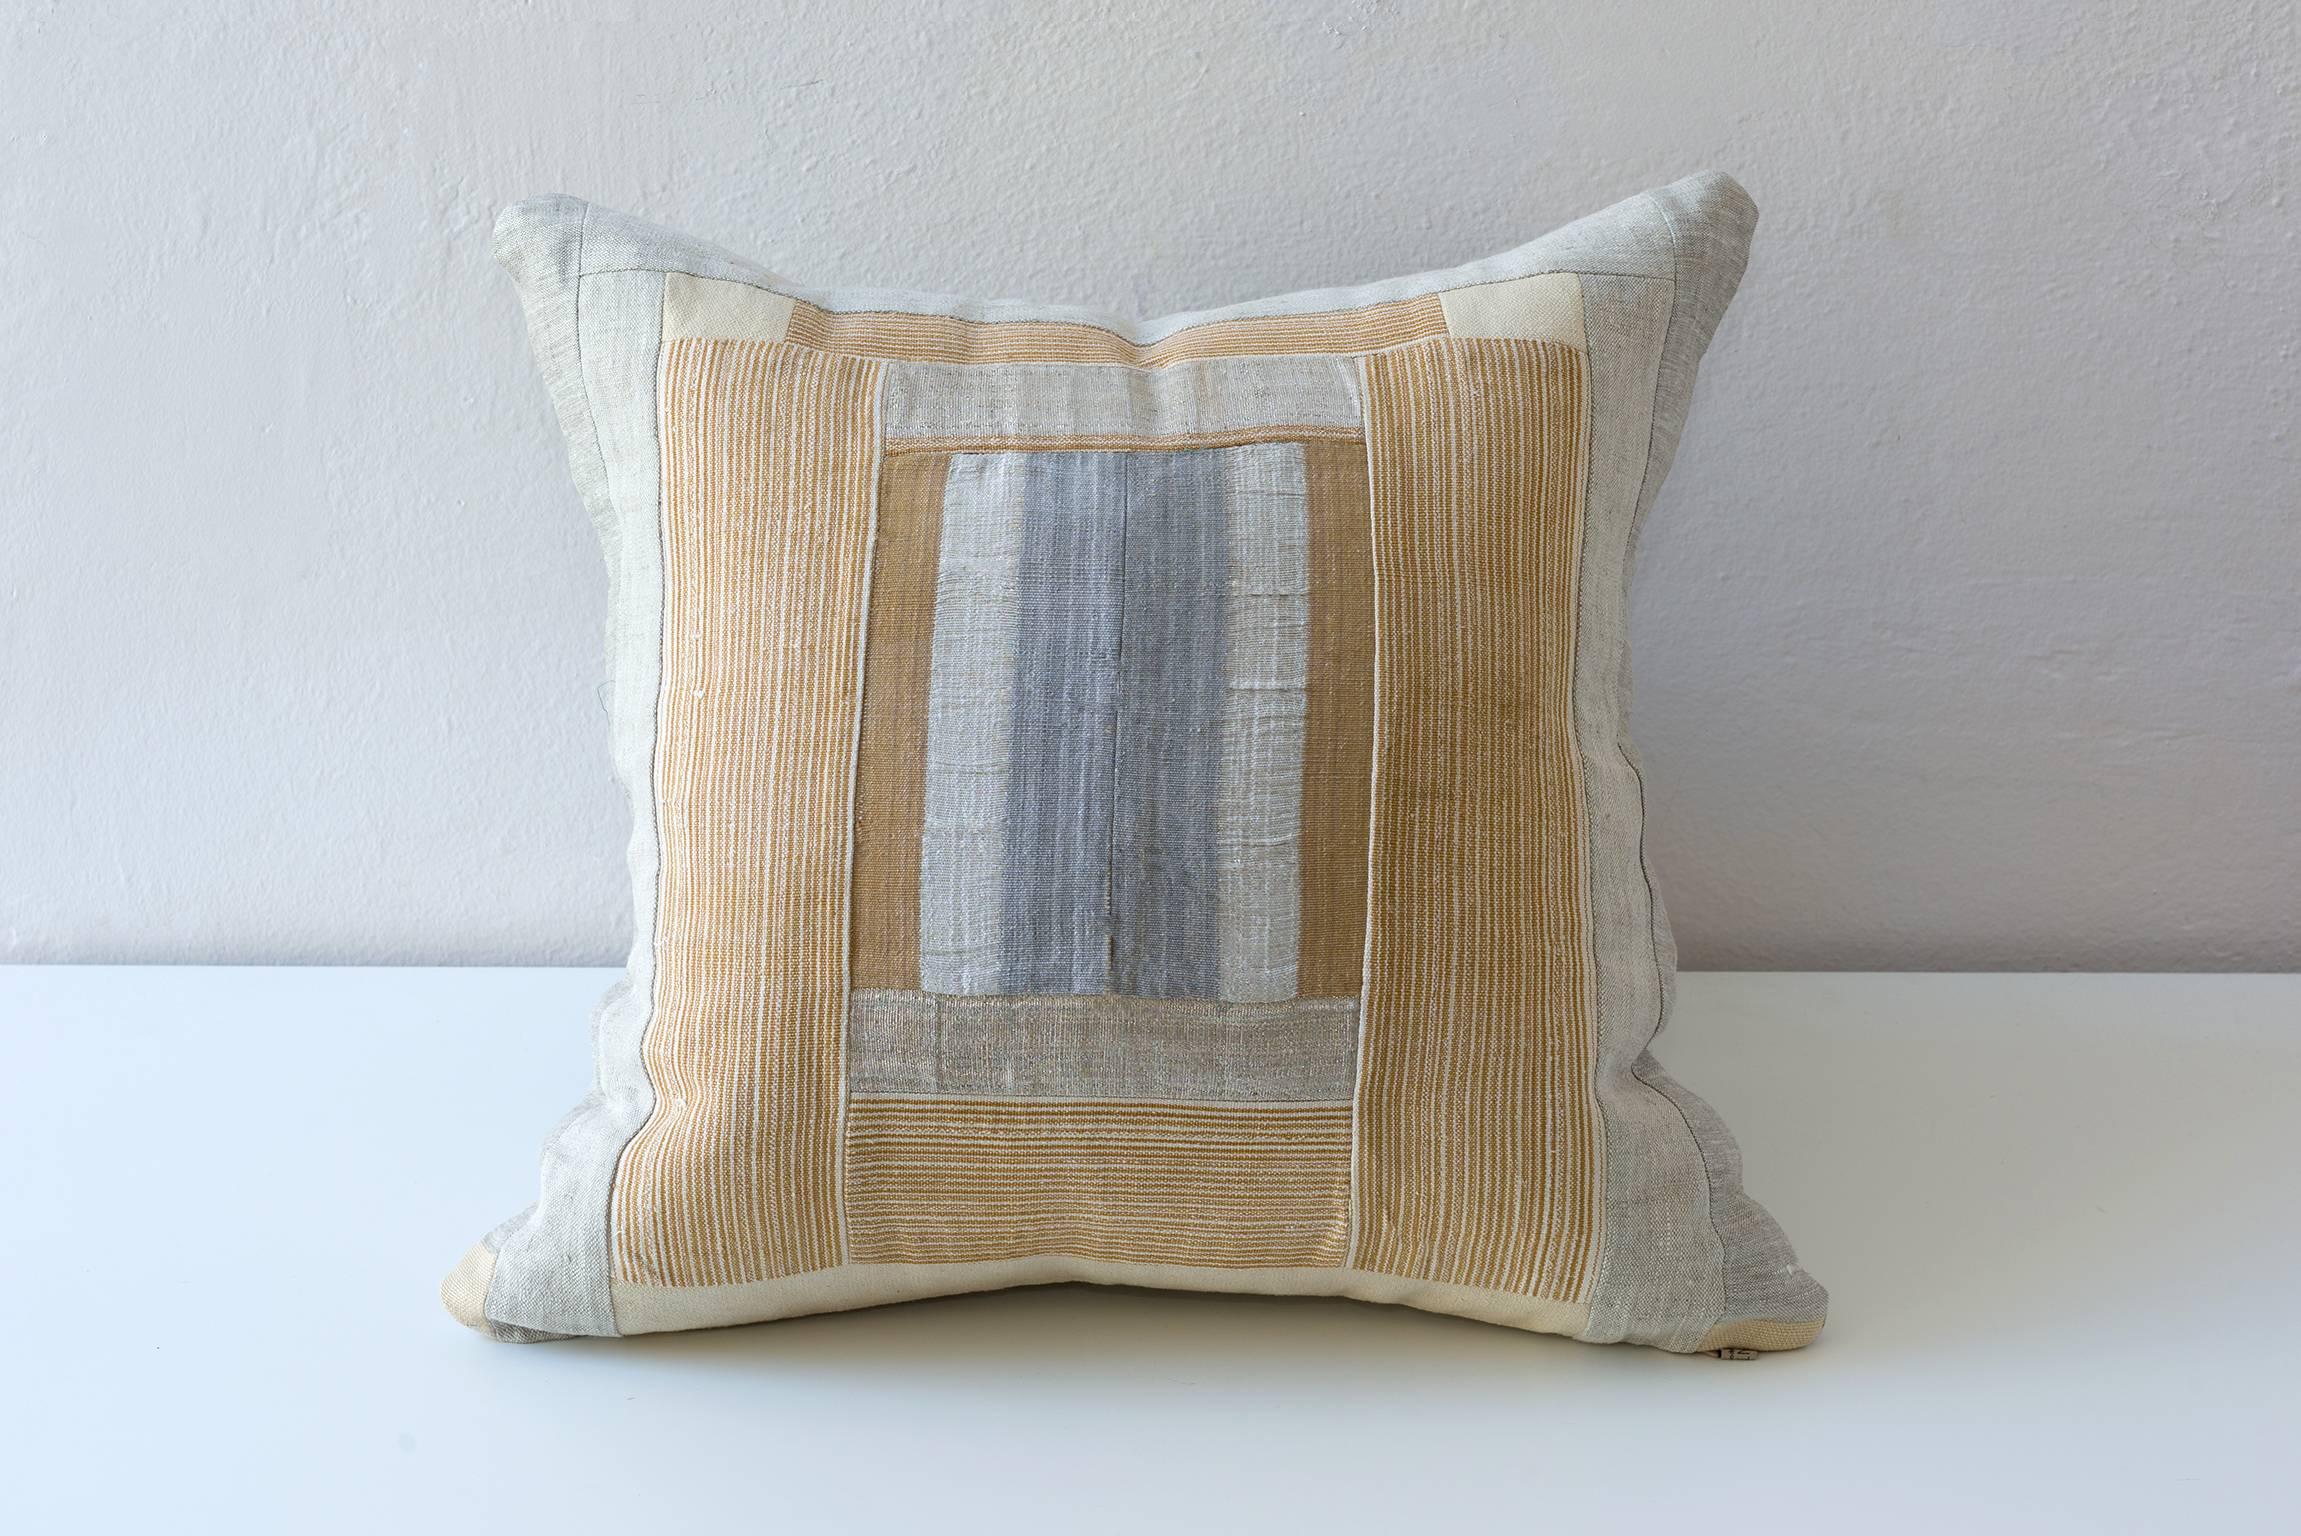 Oso Oke piecework cushion. Narrow loomed textile by the Yoruba, Nigeria. Gold and butterscotch stripe and the other in a silver and tan stripe with a Lurex metallic silver composed with a coordinating linen. 

Linen on reverse as the border on the